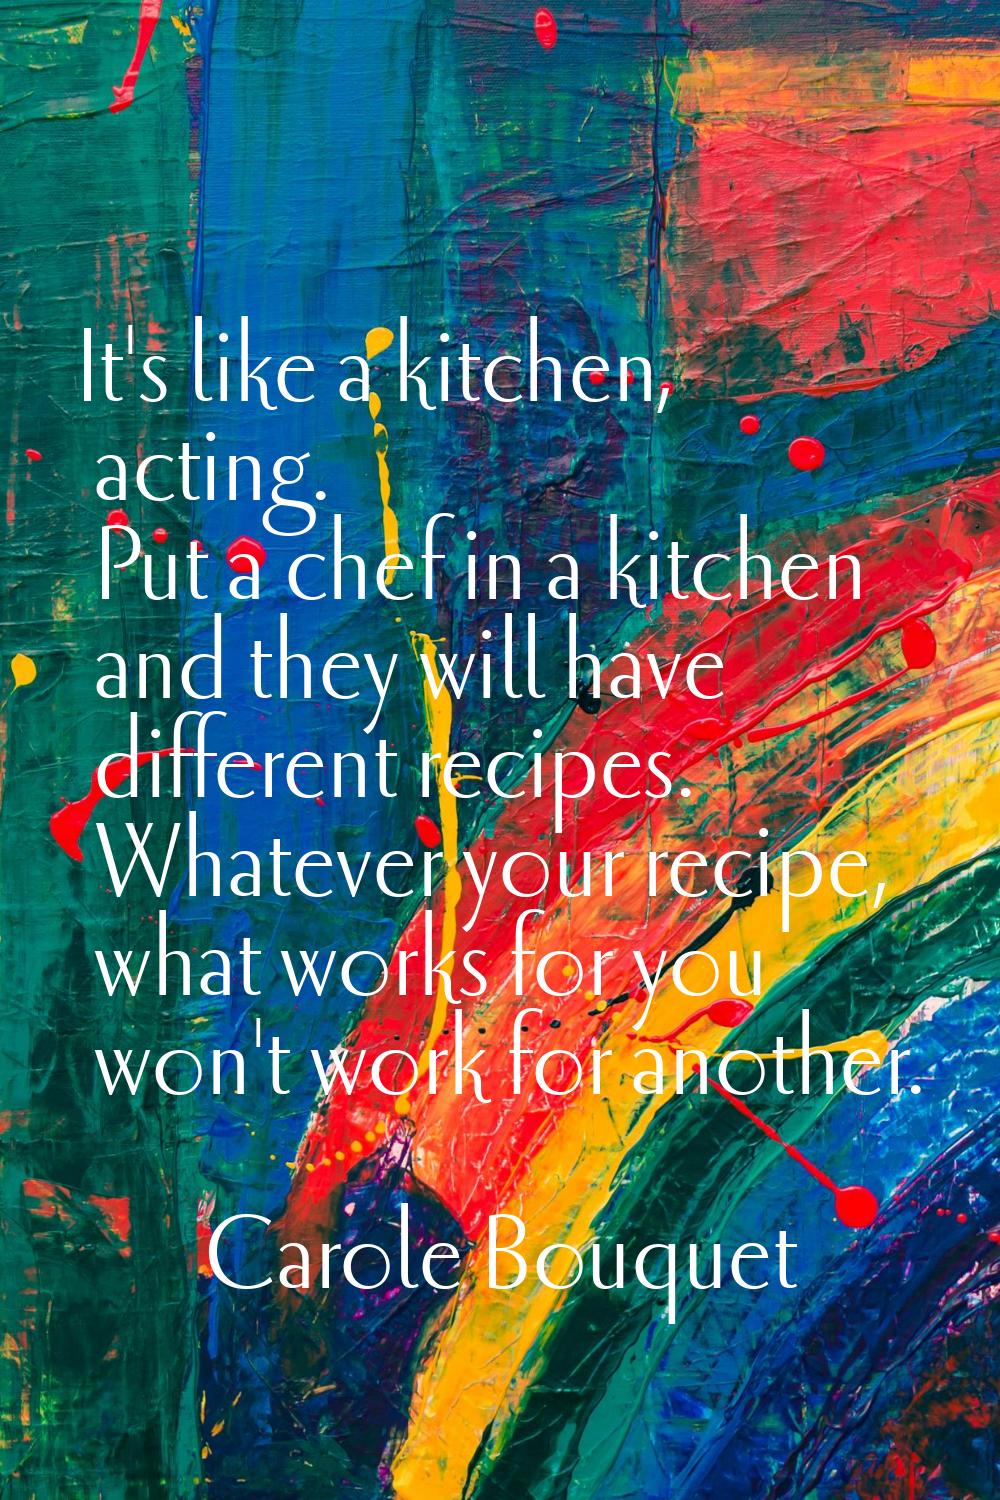 It's like a kitchen, acting. Put a chef in a kitchen and they will have different recipes. Whatever